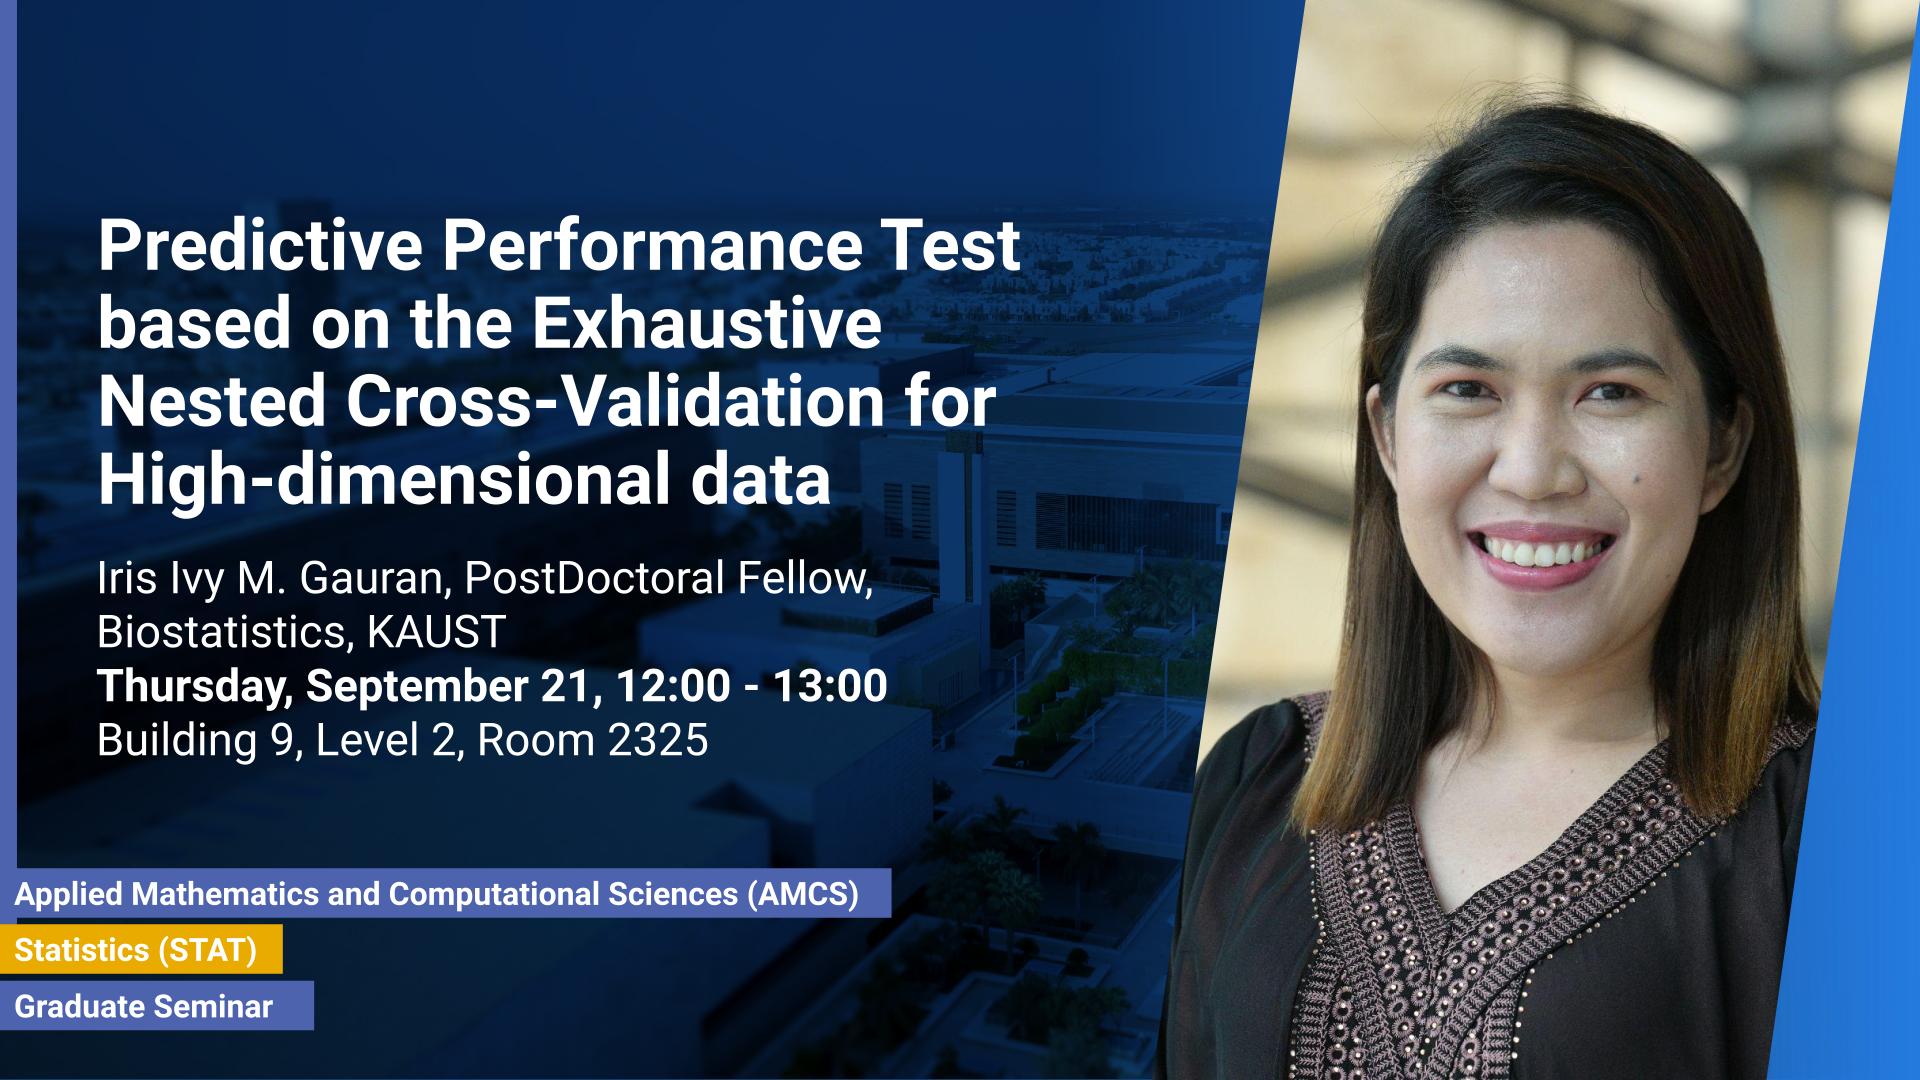 KAUST CEMSE AMCS STAT Graduate Seminar  Iris  Gauran Predictive Performance Test based on the Exhaustive Nested Cross Validation for High-dimensional data